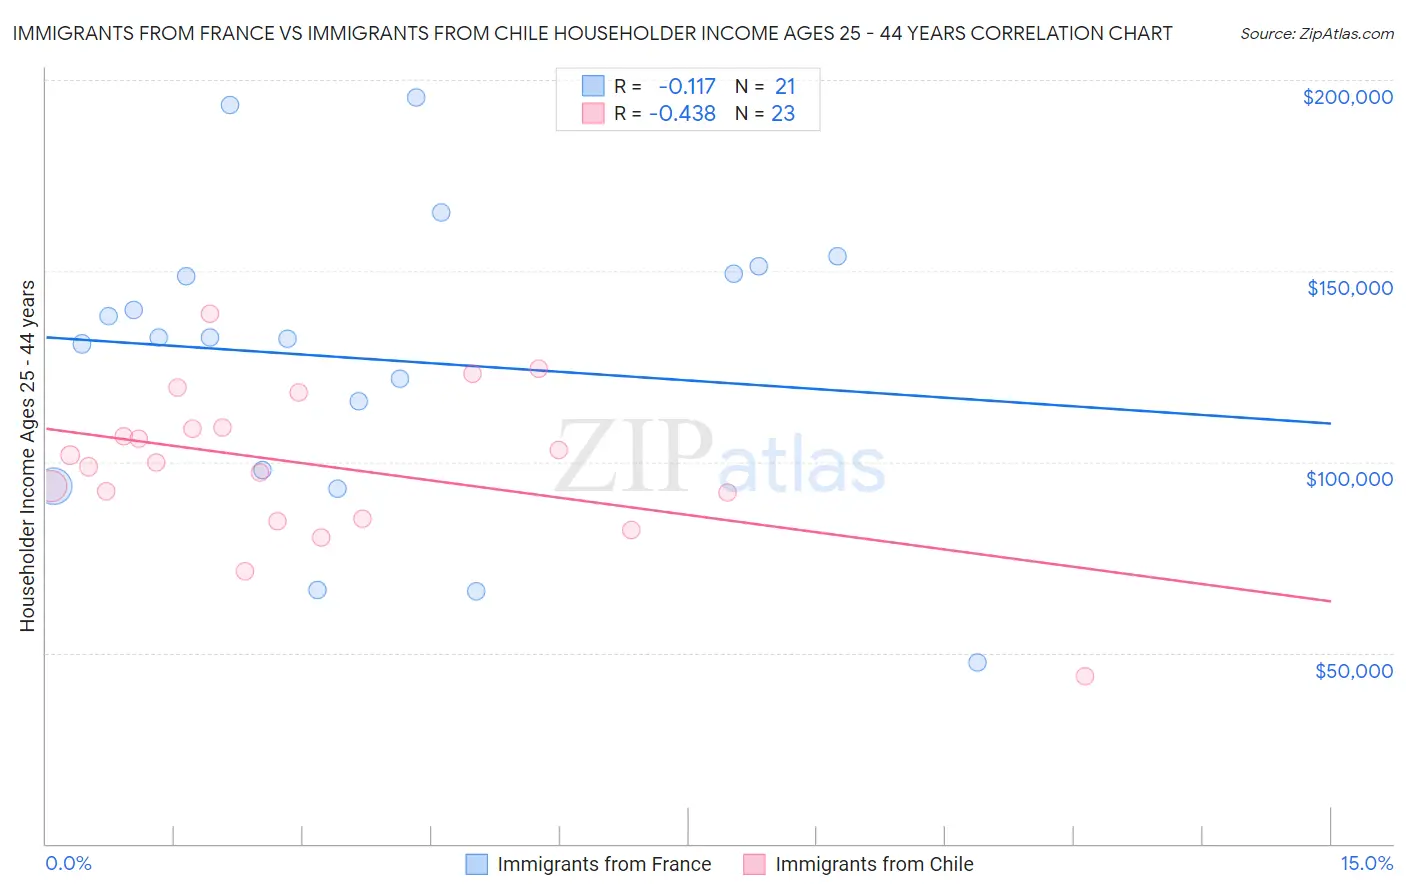 Immigrants from France vs Immigrants from Chile Householder Income Ages 25 - 44 years